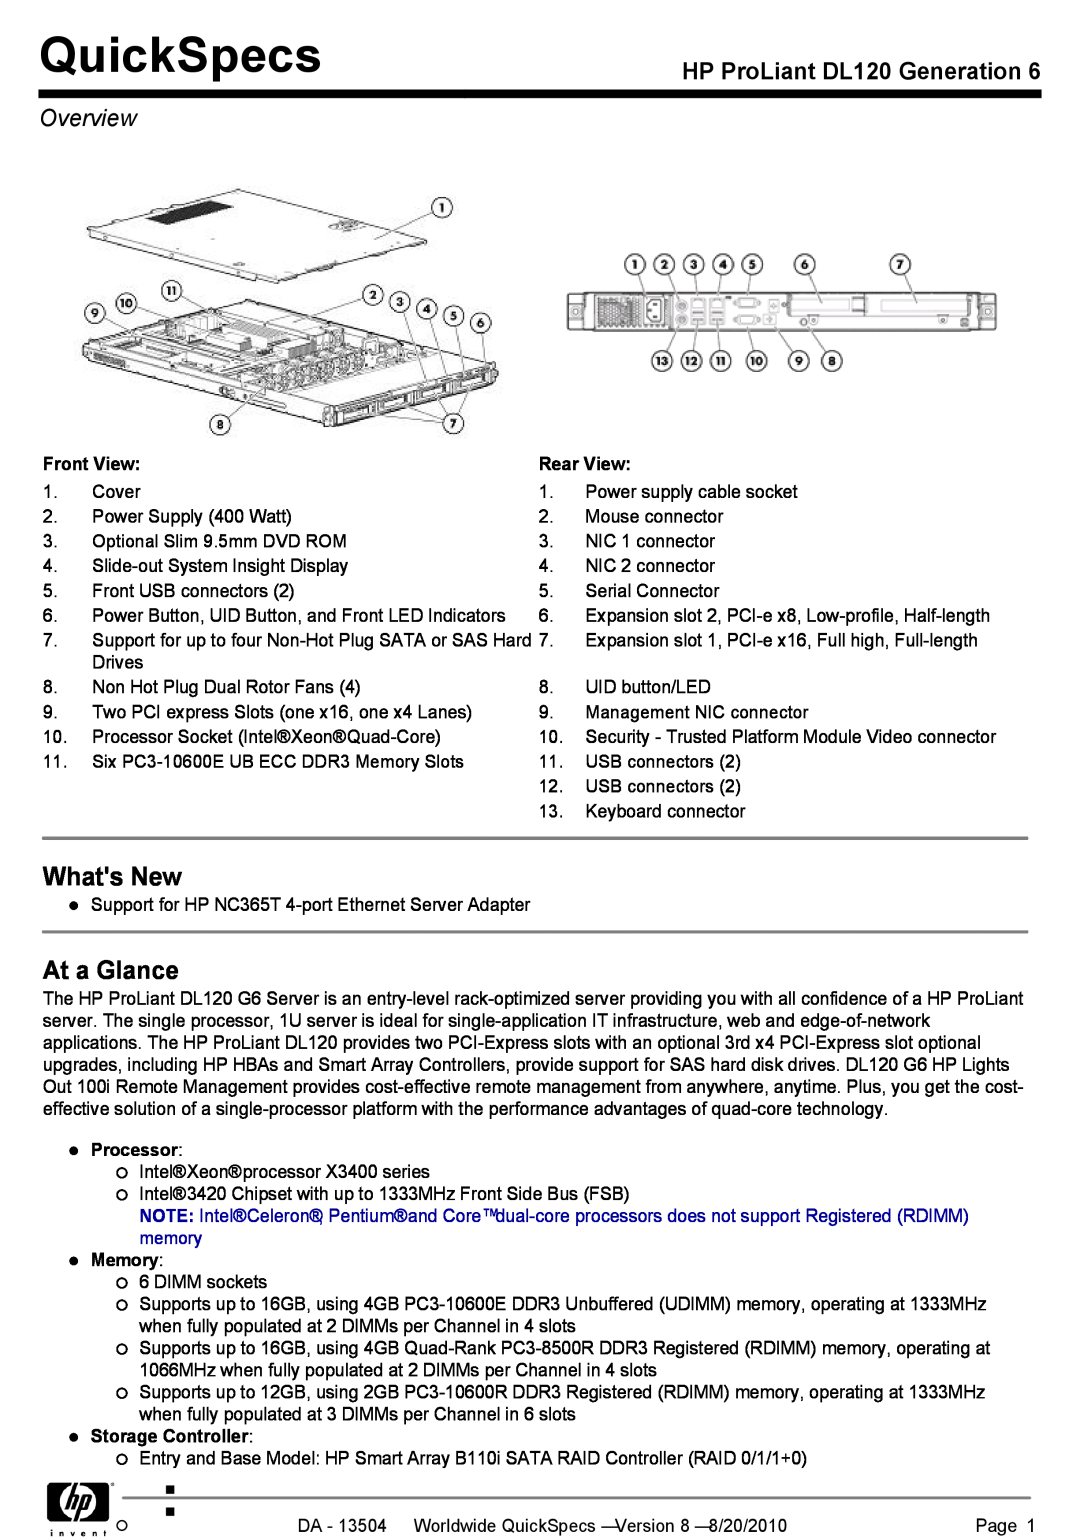 HP manual QuickSpecs, Whats New, At a Glance, HP ProLiant DL120 Generation, Overview 